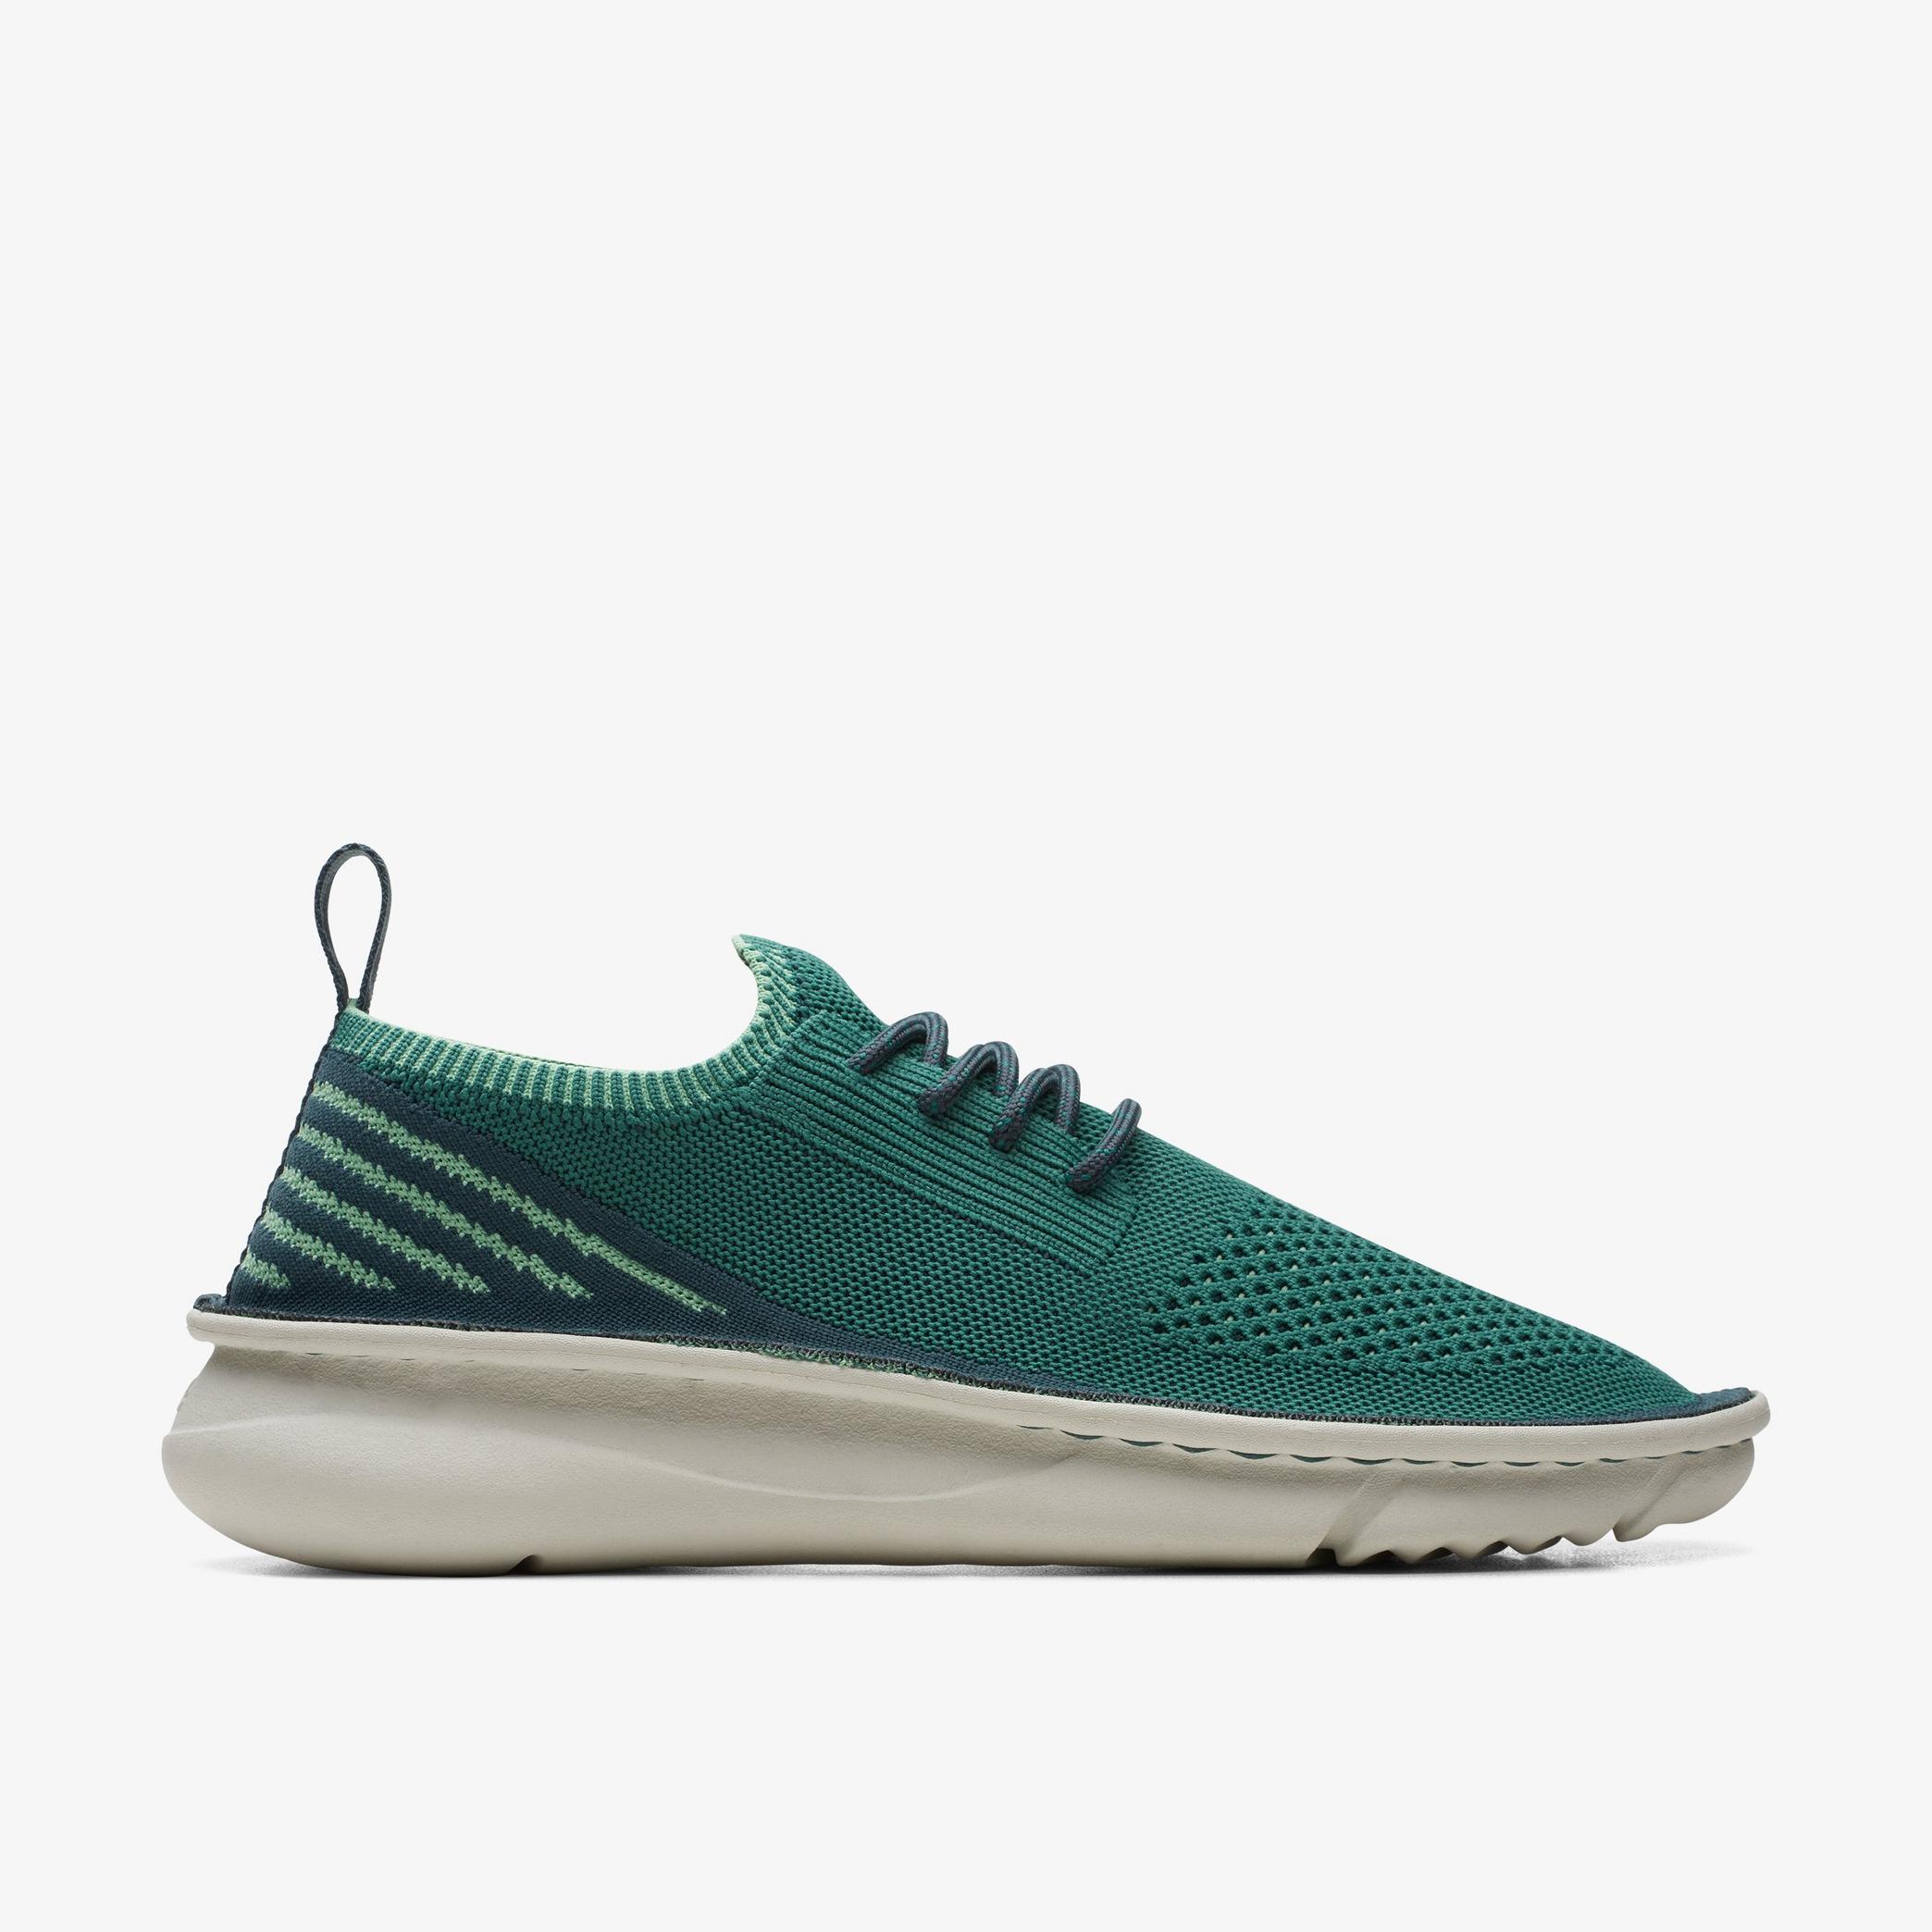 Clarks Origin2 Green Knit Trainers, view 1 of 6